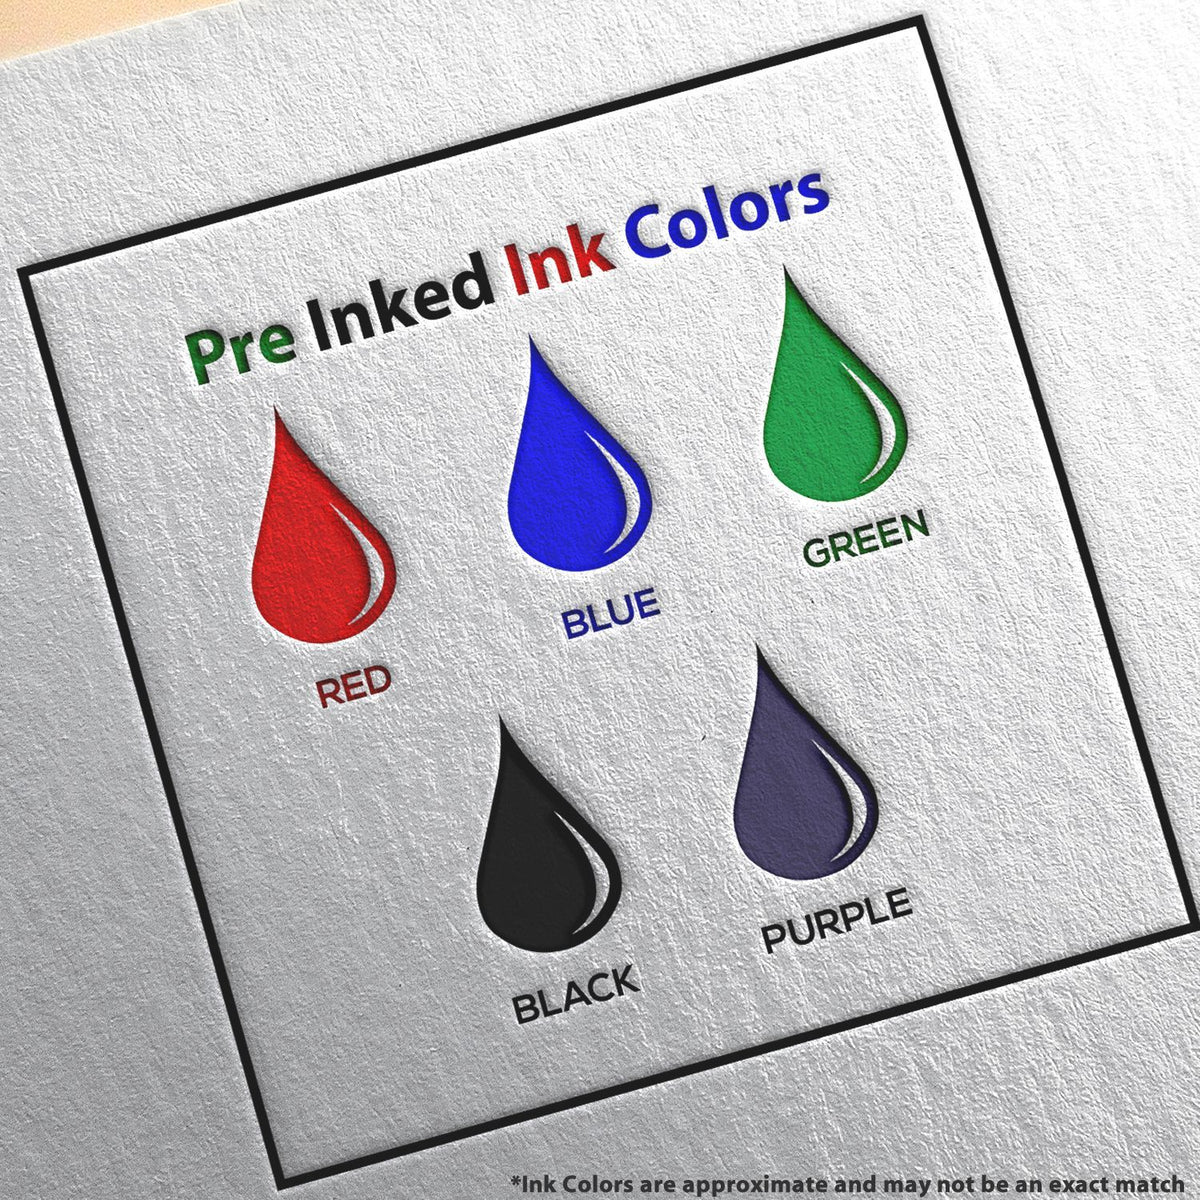 Pre Inked Colors